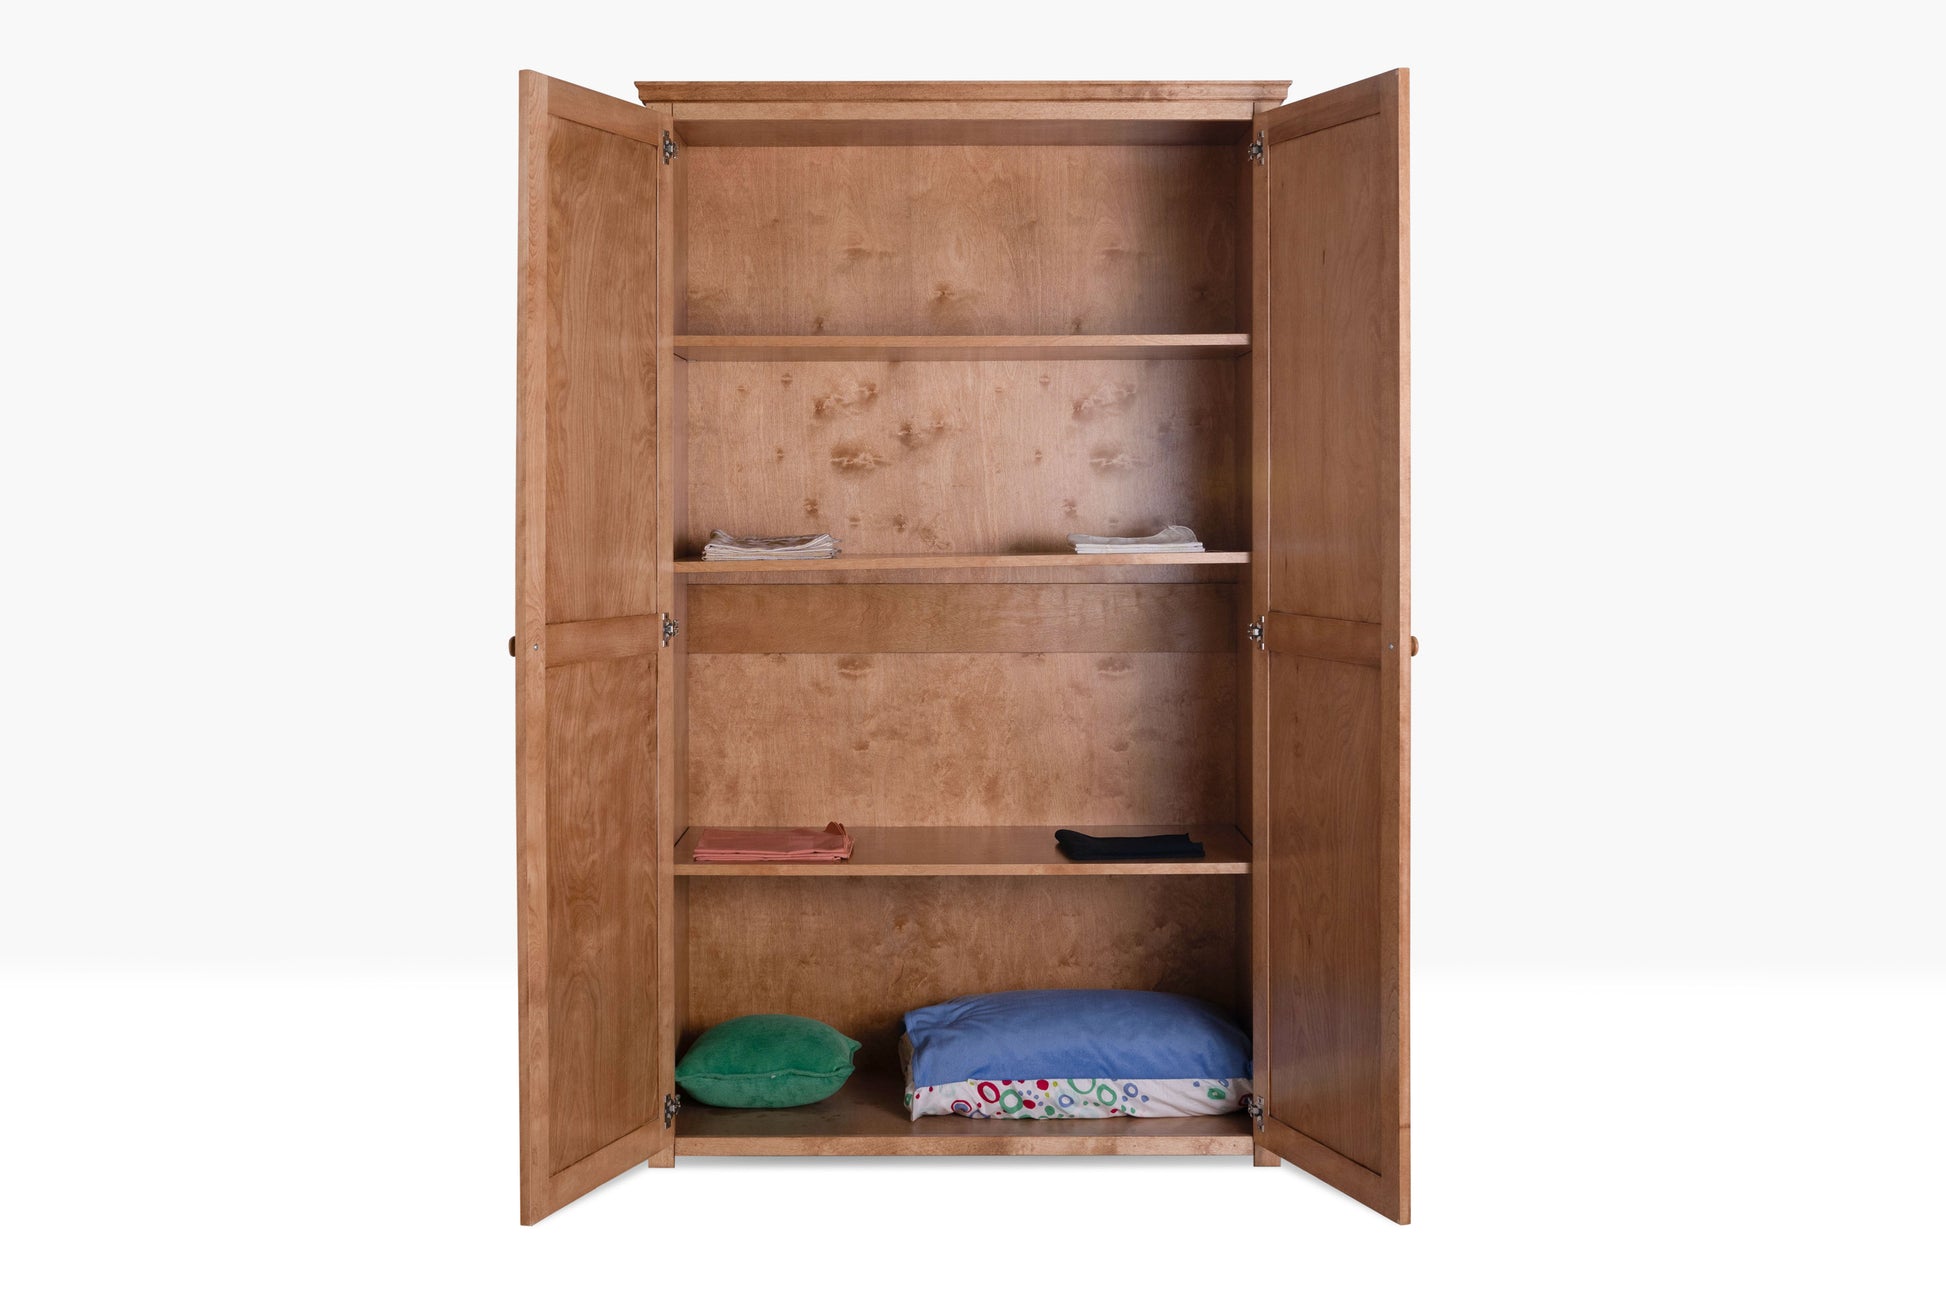 Berkshire Plymouth Pantry Cabinet shown in Legacy Cherry finish, with adjustable shelving and crown moulding.